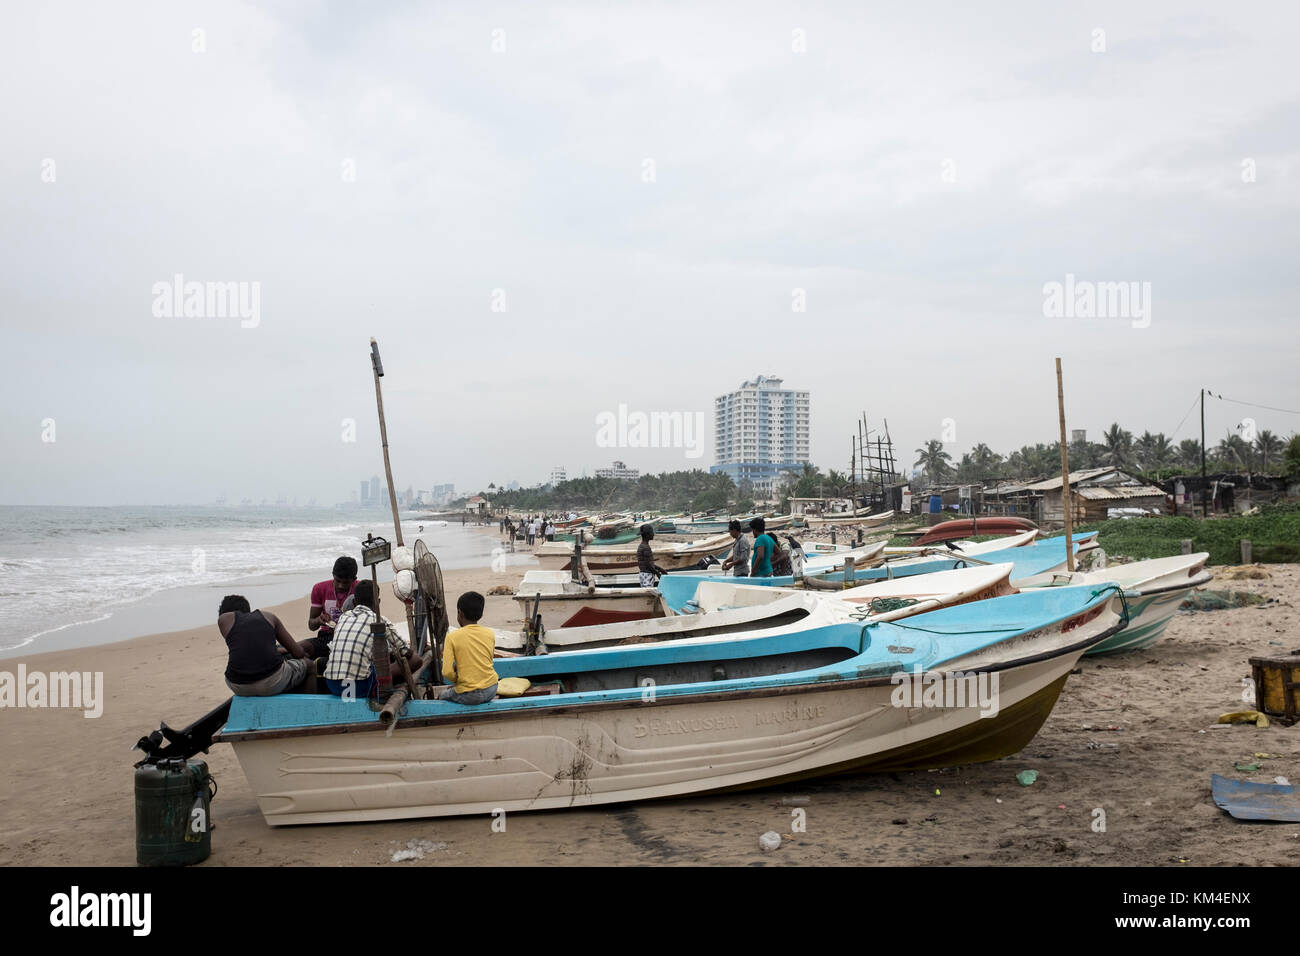 Fishermen tend to their boats on the beach in Colombo, Sri Lanka Stock Photo